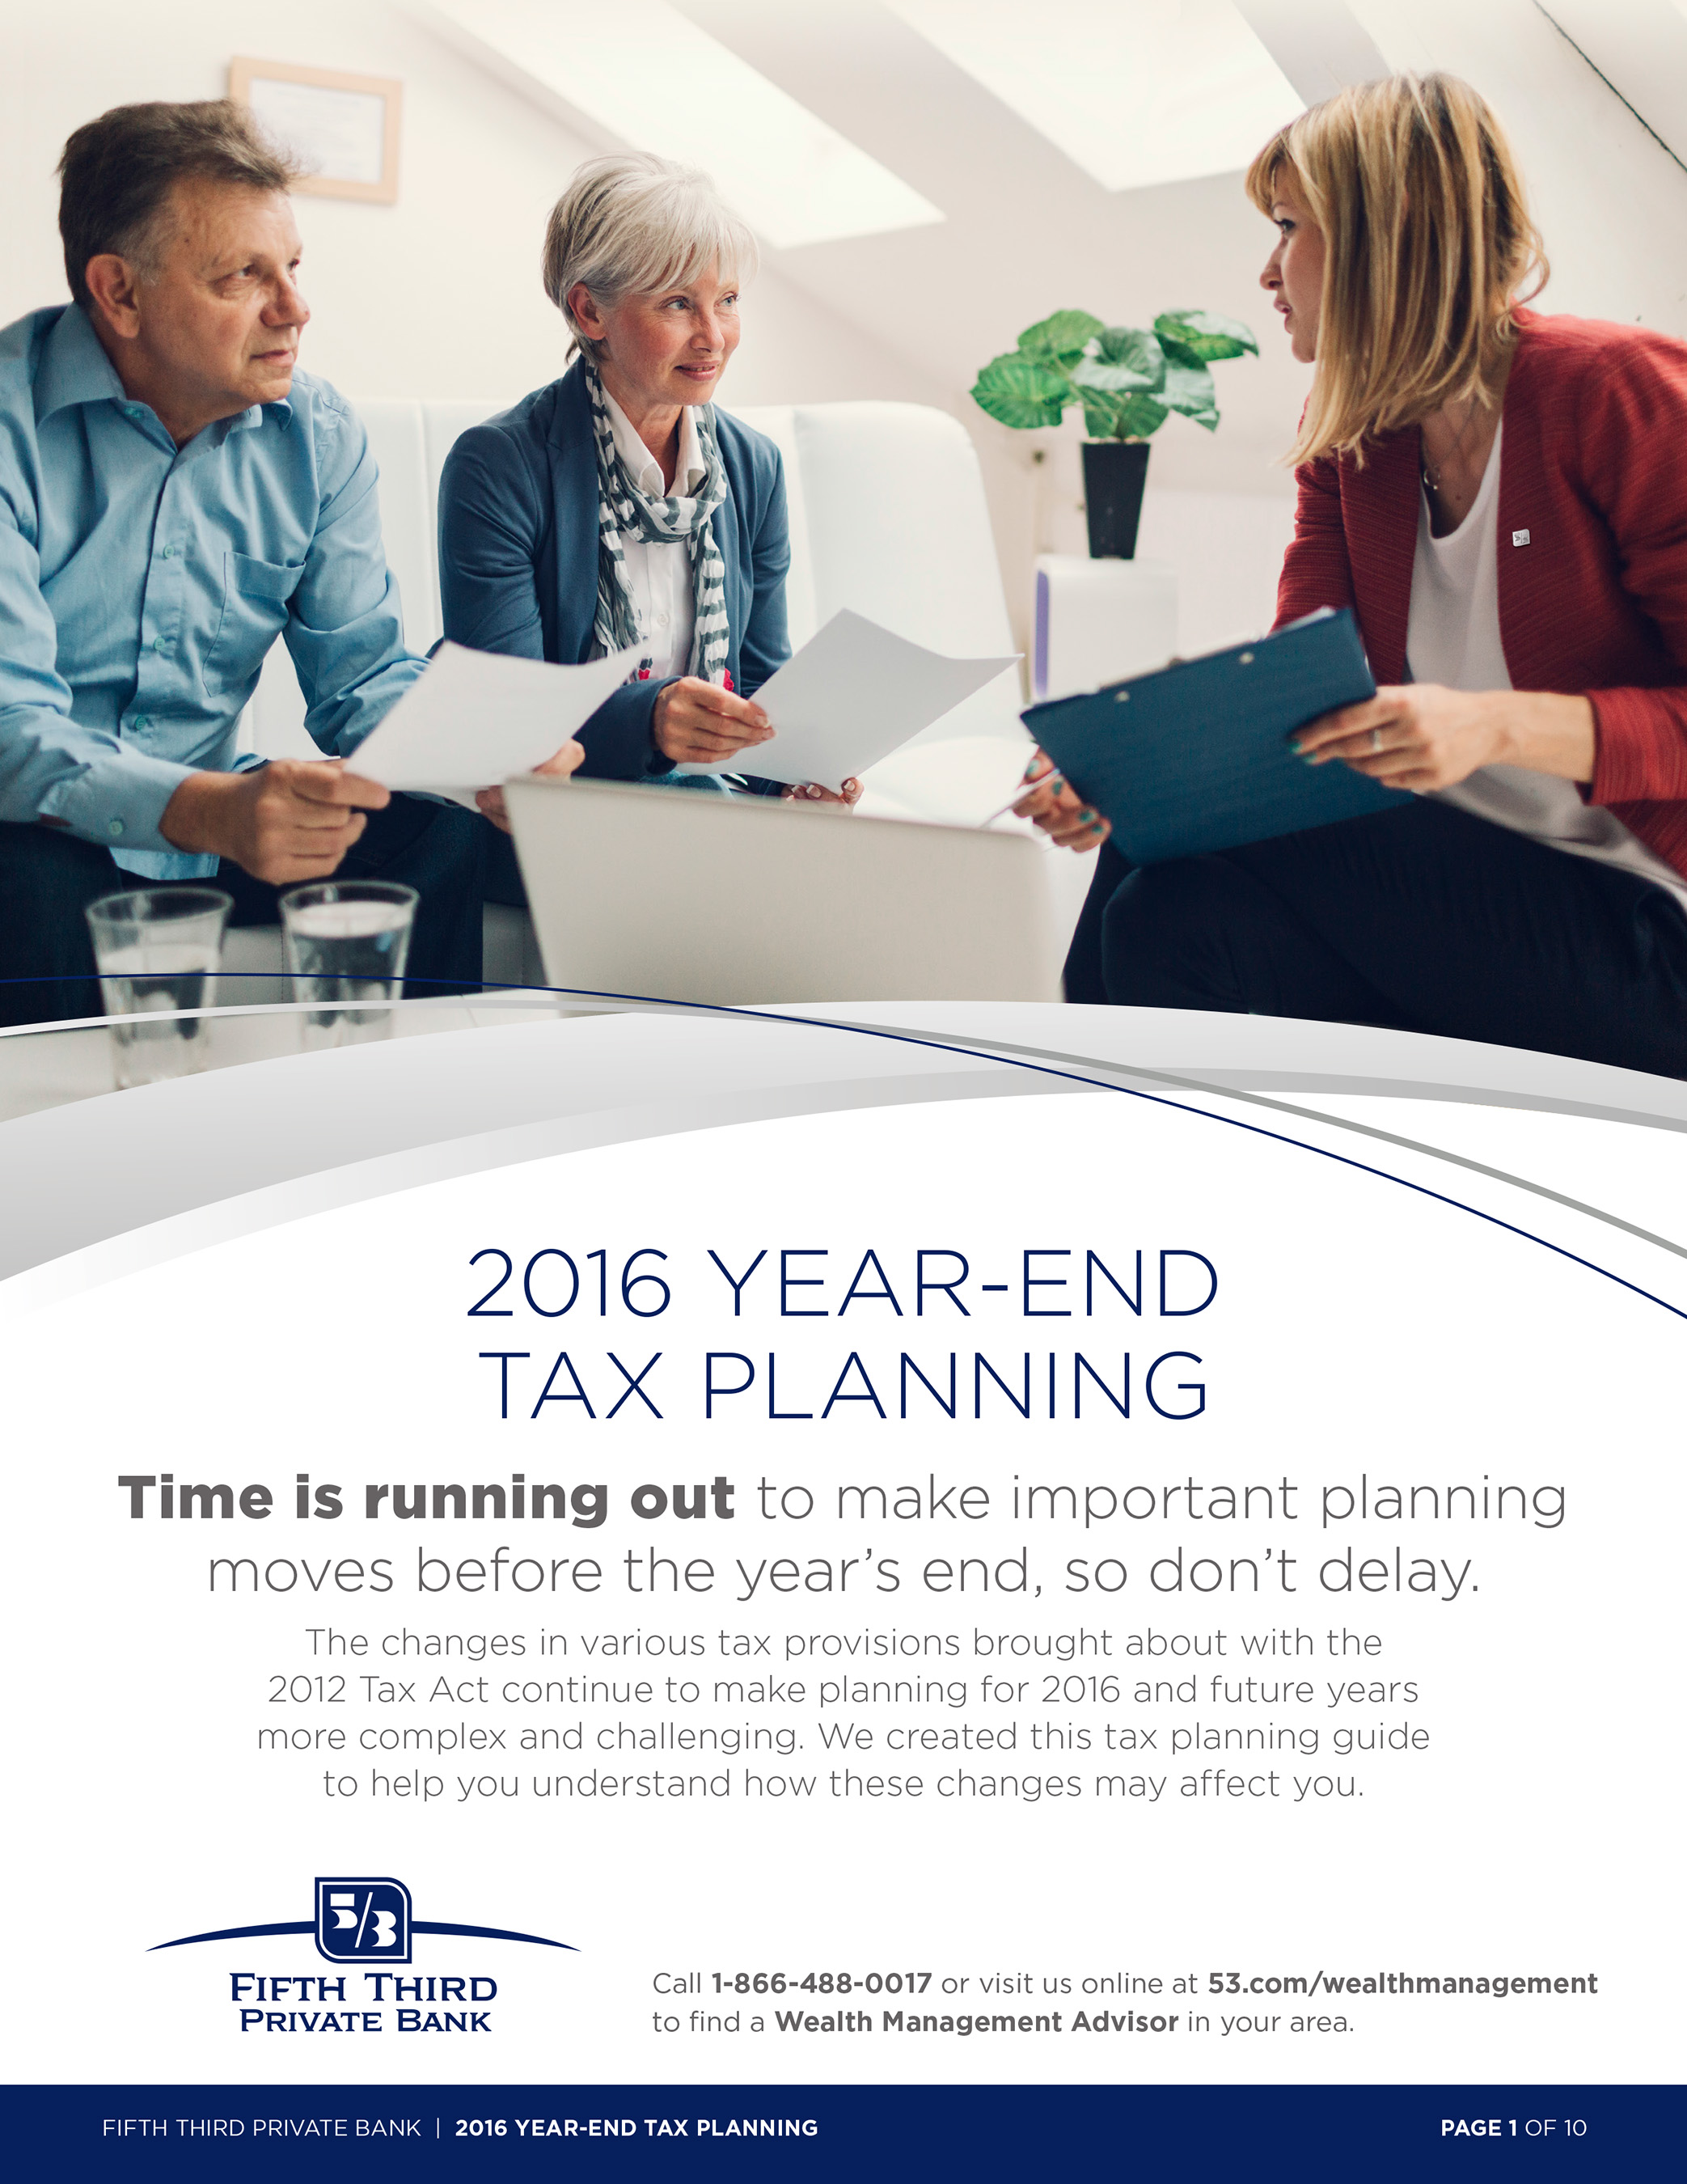 Time is running out to make important planning moves before the year’s end, so don’t delay.